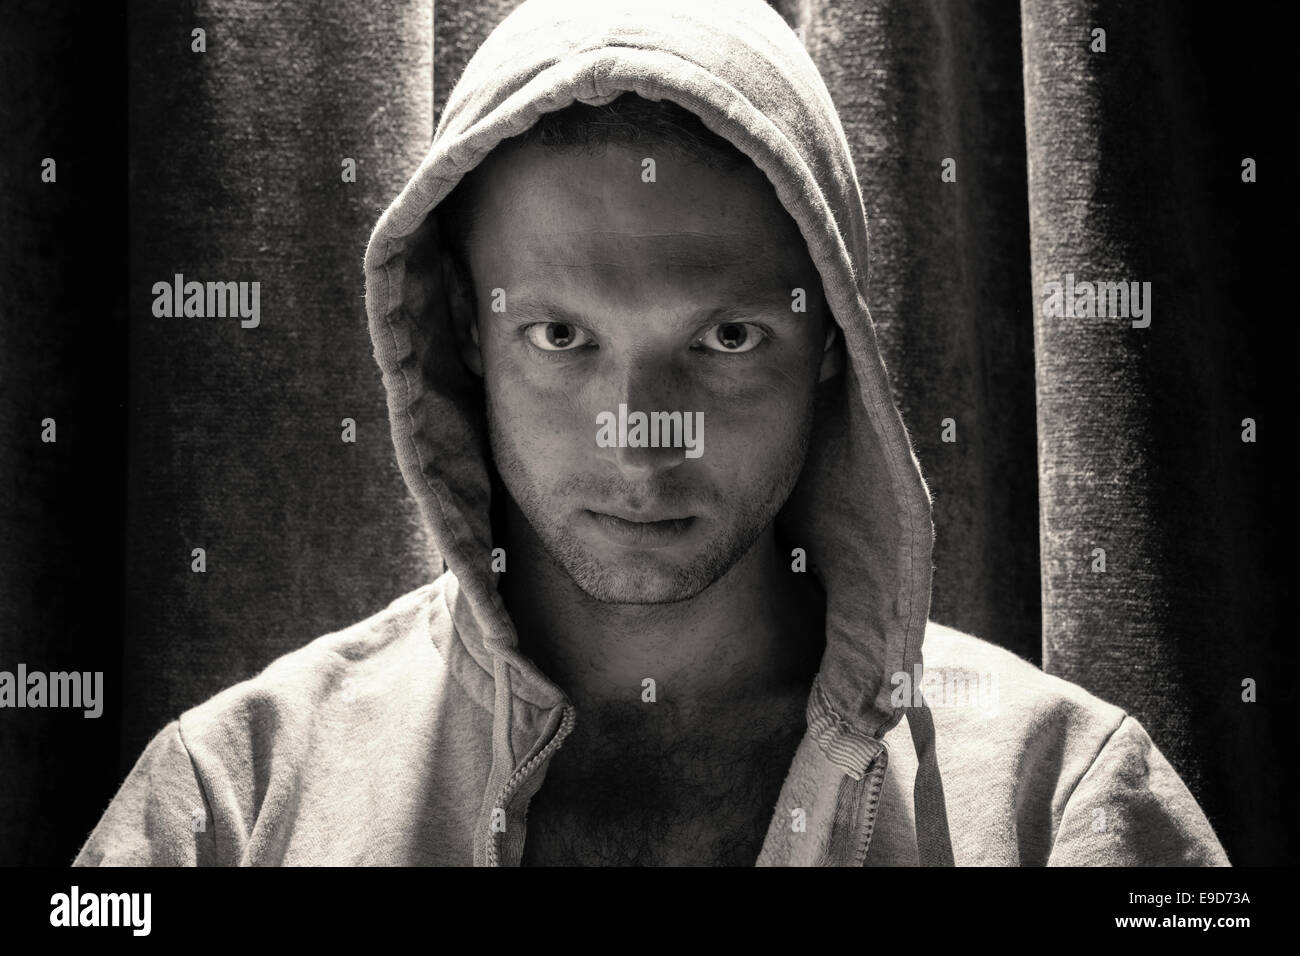 Black and white portrait of young Caucasian man in hood Stock Photo